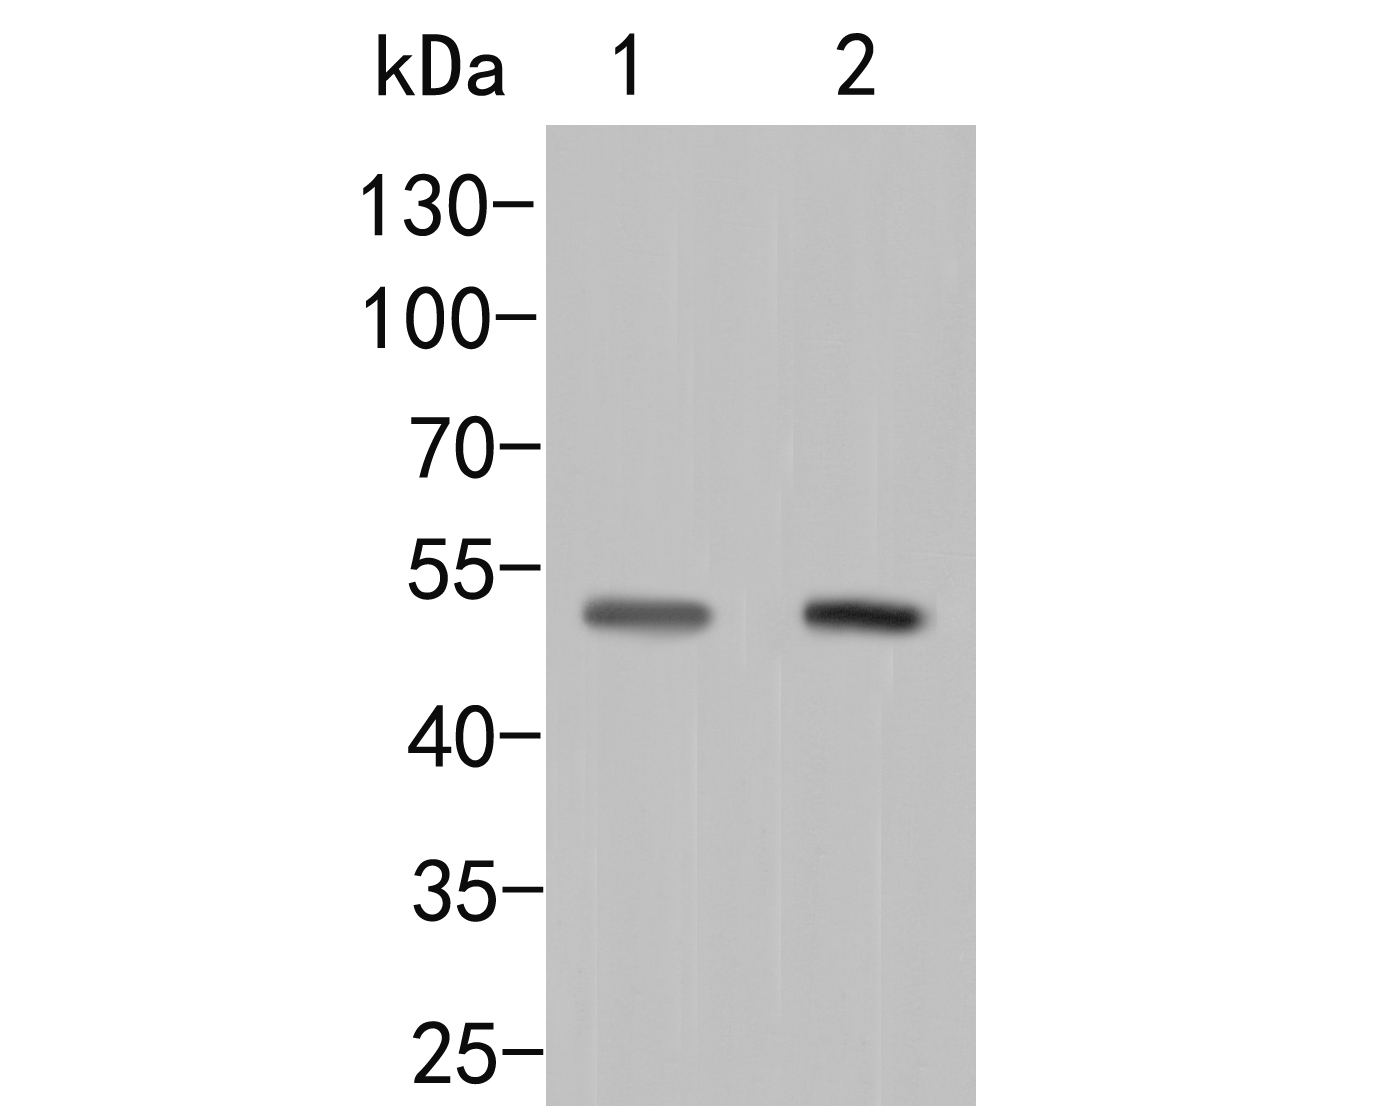 Western blot analysis of P2RX5 on different lysates. Proteins were transferred to a PVDF membrane and blocked with 5% BSA in PBS for 1 hour at room temperature. The primary antibody (ER2001-36, 1/1000) was used in 5% BSA at room temperature for 2 hours. Goat Anti-Rabbit IgG - HRP Secondary Antibody (HA1001) at 1:5,000 dilution was used for 1 hour at room temperature.<br />
Positive control: <br />
Lane 1: Rat brain tissue lysate<br />
Lane 2: Rat heart tissue lysate